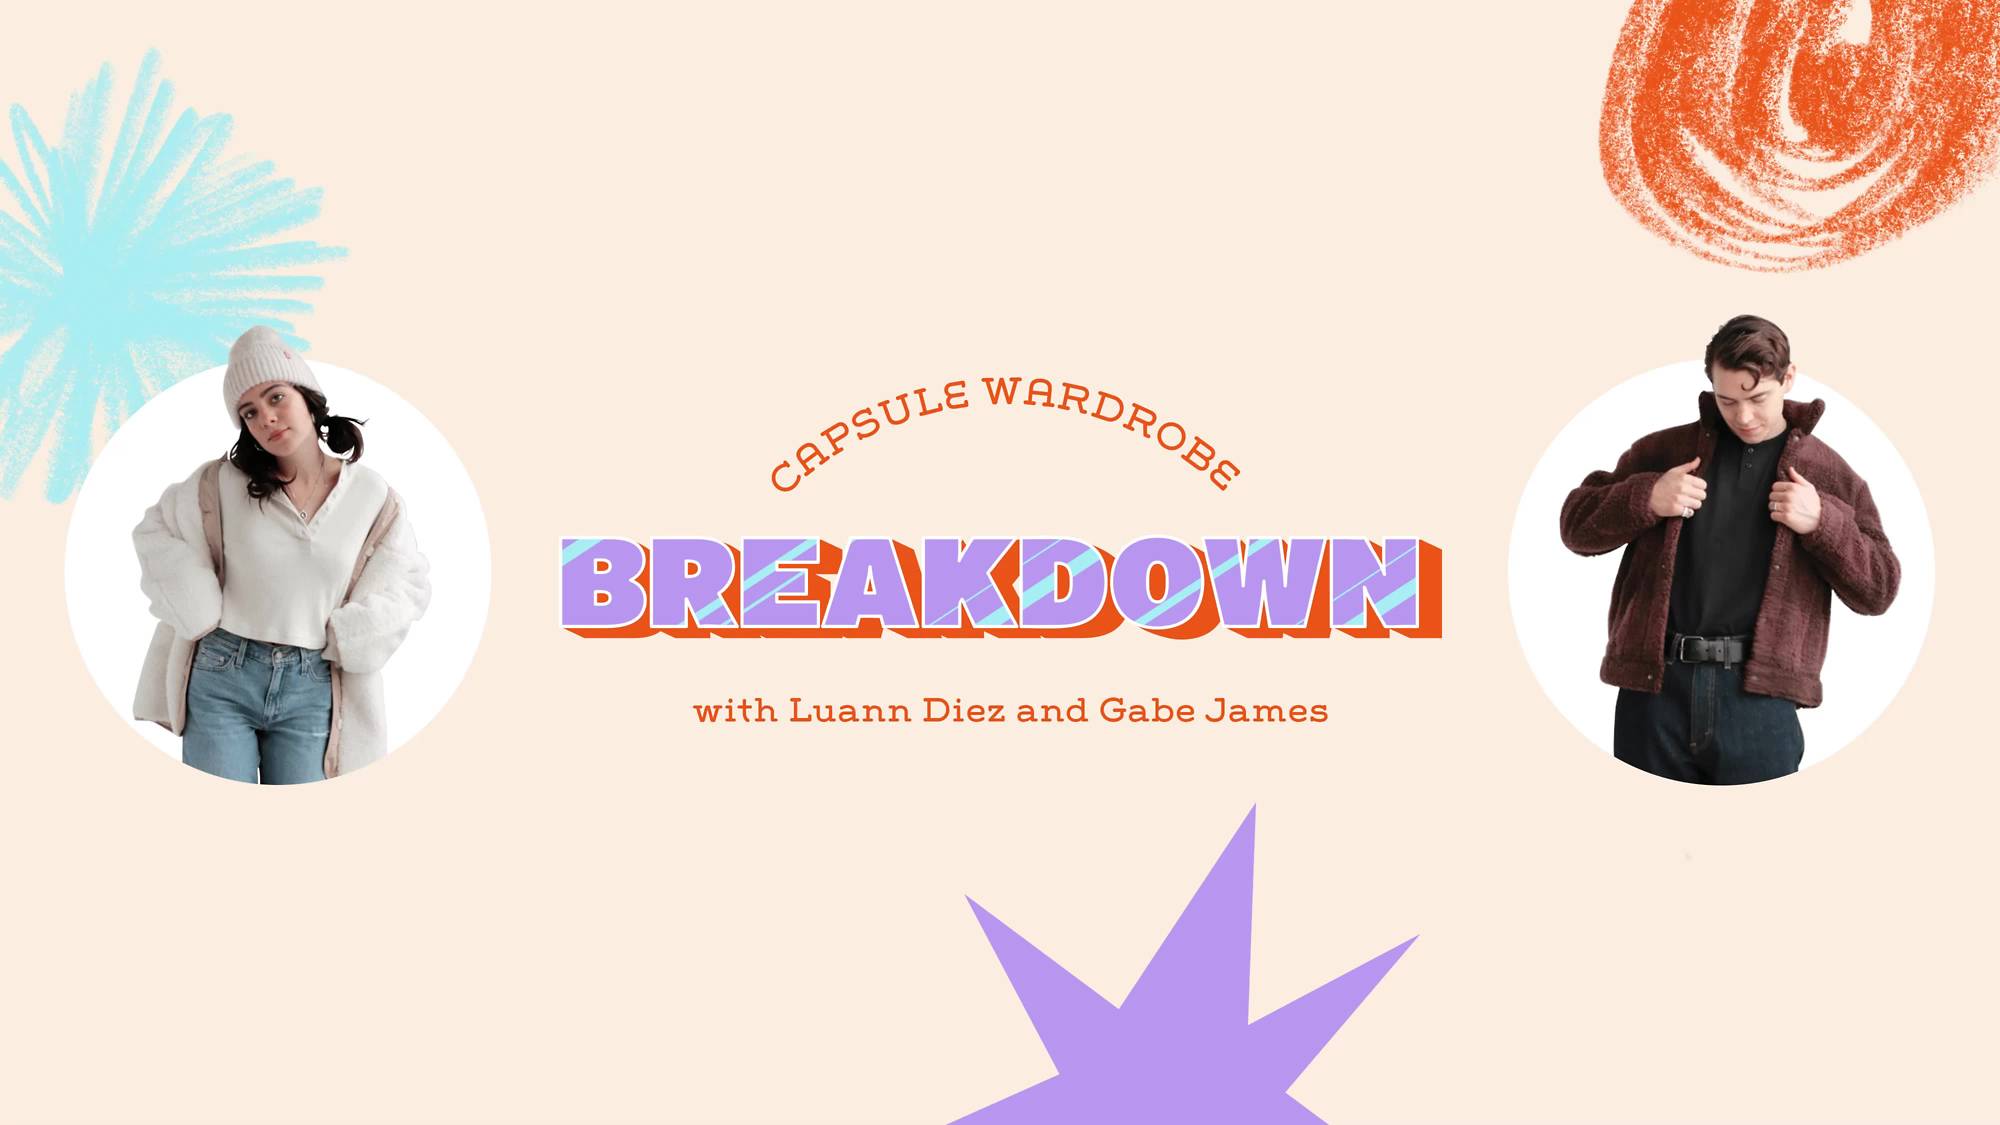 Models popping out of circles on a beige background with playful doodles overlaid with an animating glistening effect over the graphic treatment that reads "Capsule Wardrobe Breakdown with Luann Diez and Gabe James"